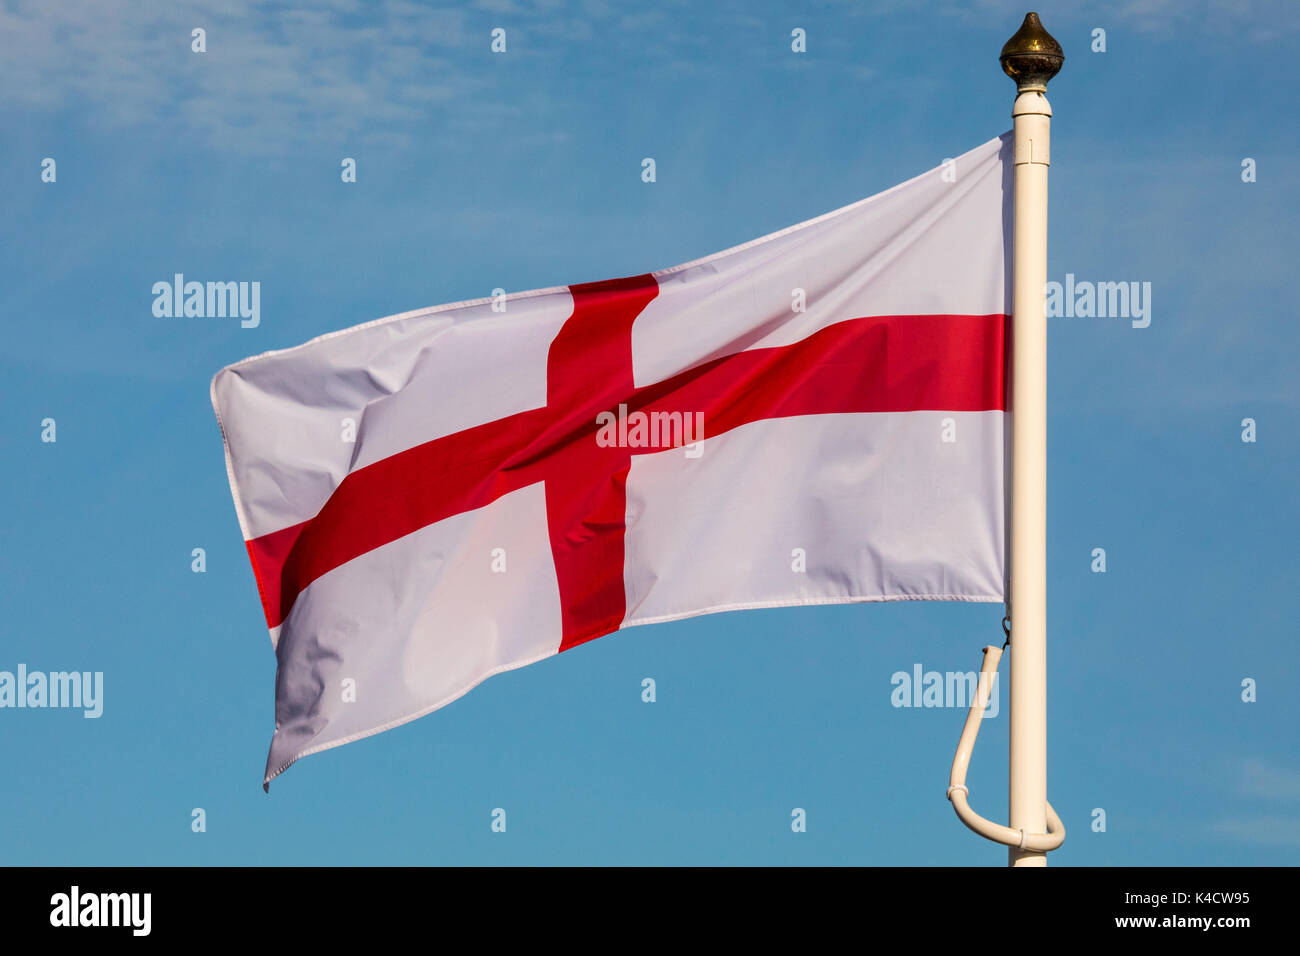 The flag of Saint George - recognised around the world as the flag of England. Stock Photo